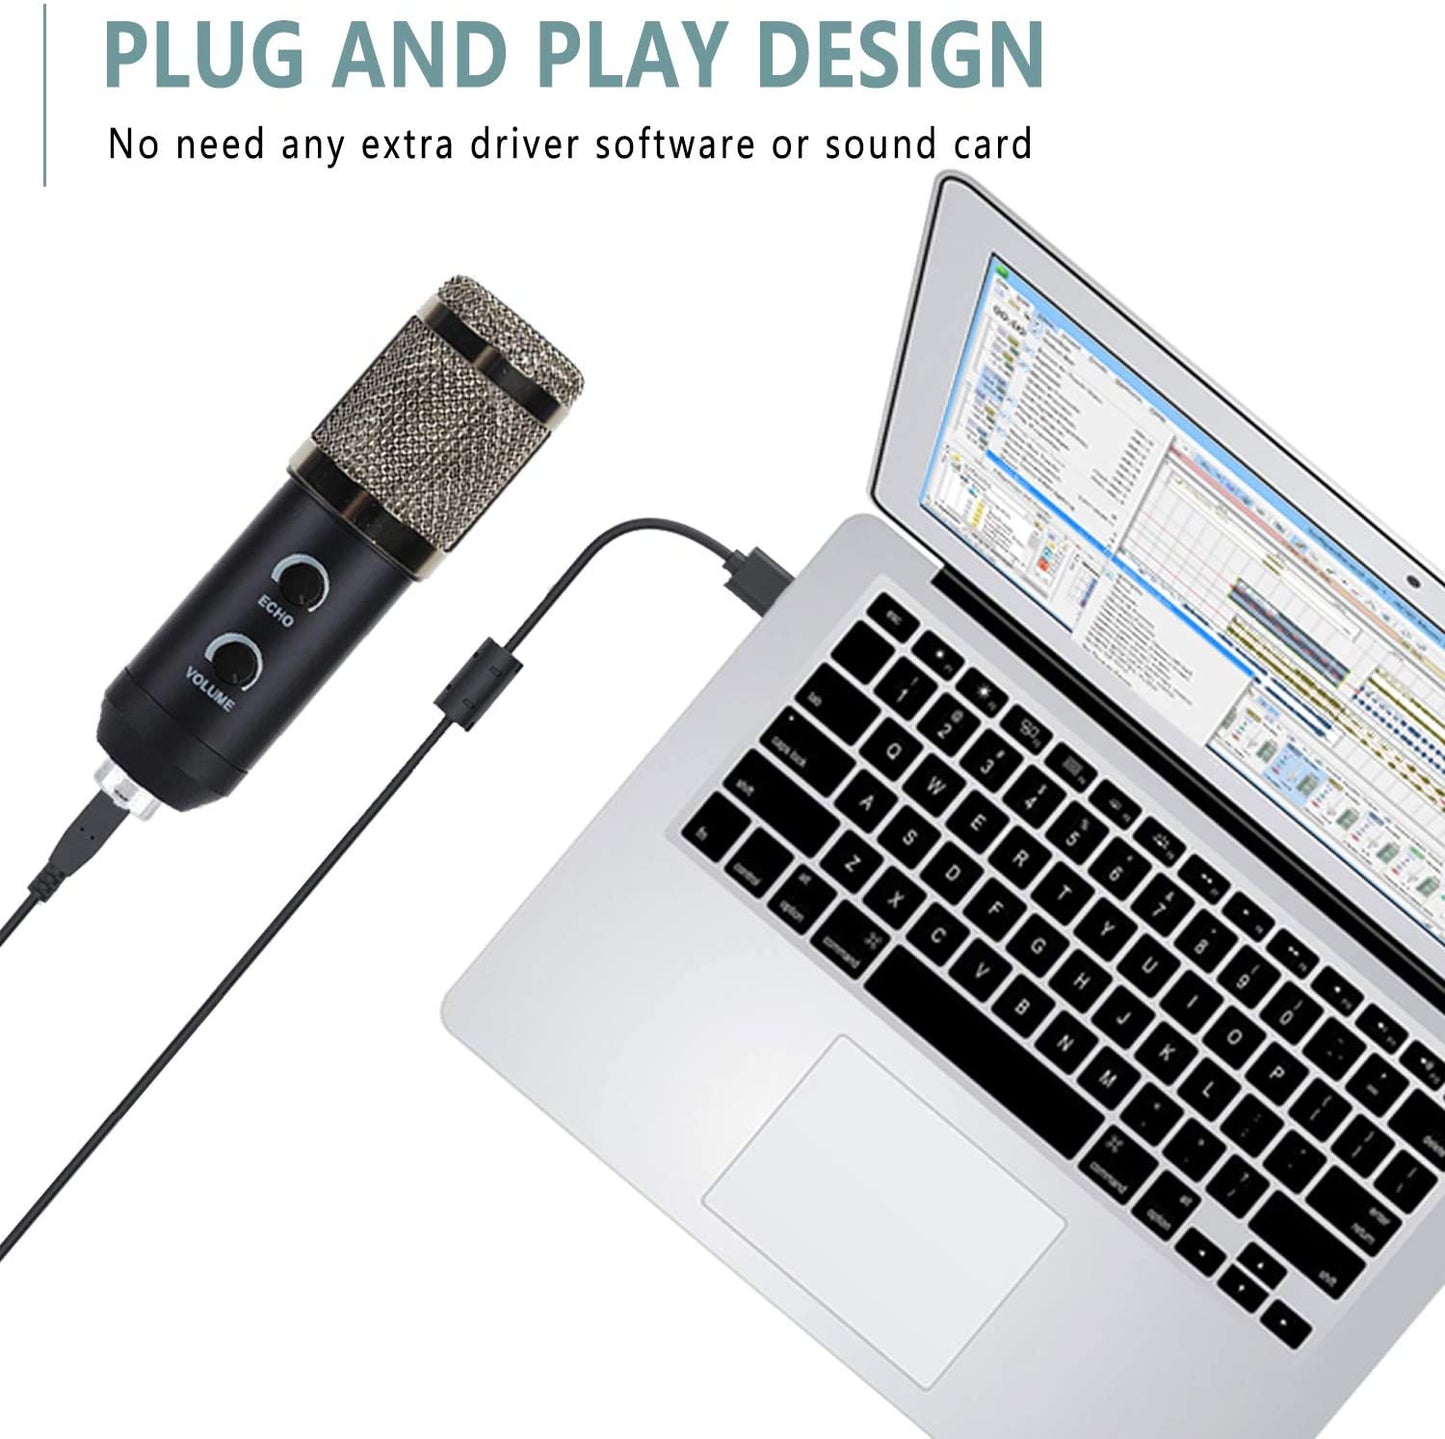 2023 Upgraded USB Microphone for Computer, Mic for Gaming, Podcast, Live Streaming, YouTube on PC, Mic Studio Bundle with Adjustment Arm Stand, Fits for Windows & Mac PC, Plug &amp; Play Design, Black